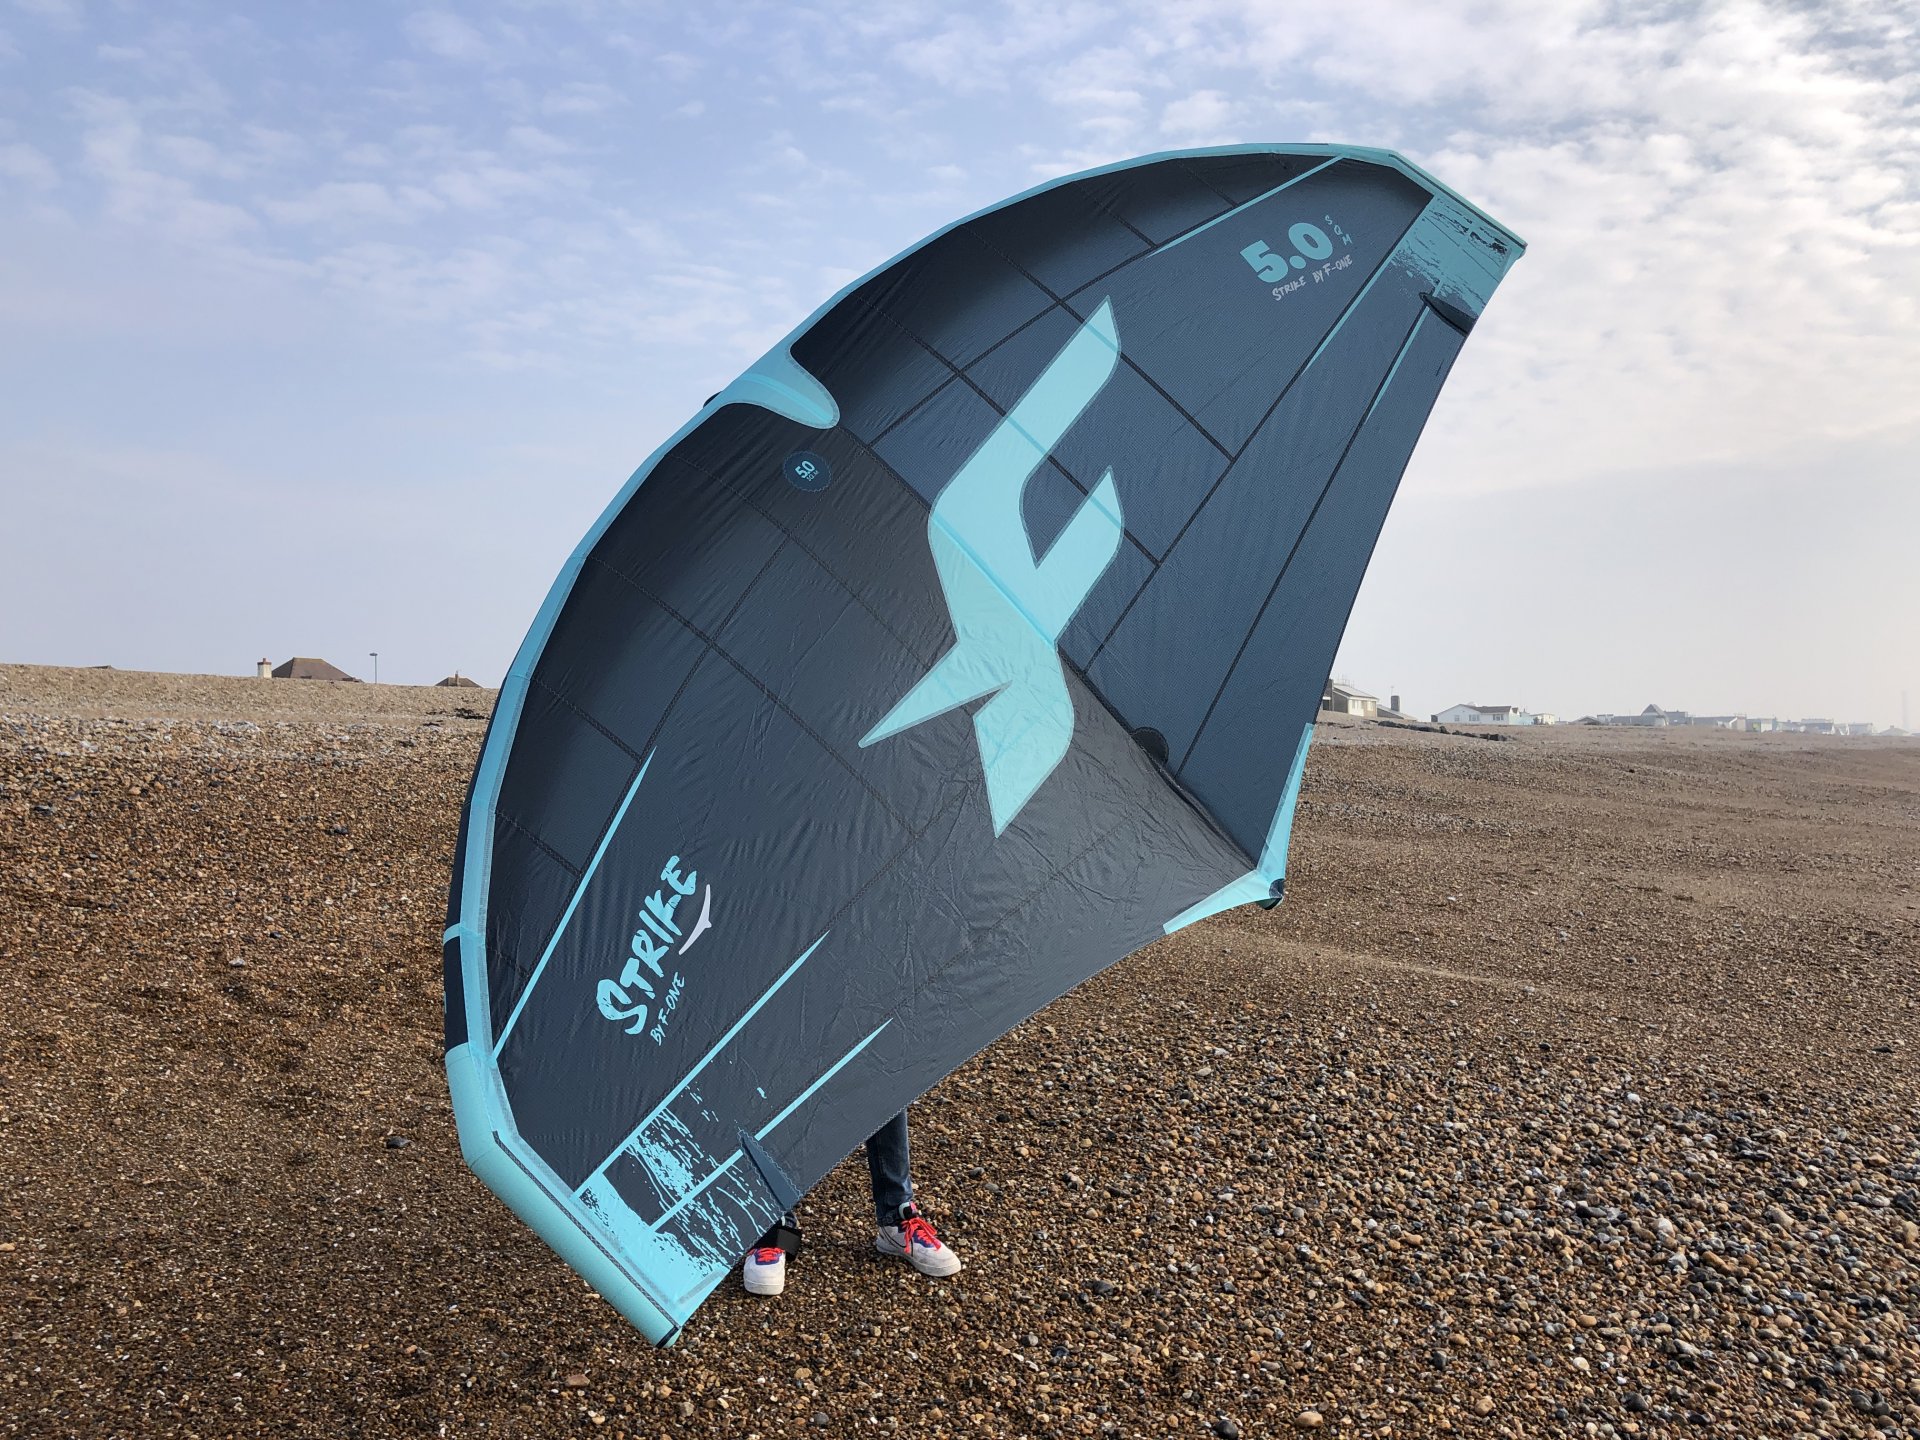 F-One Strike 5m 2021 | Wing Foiling, SUP And Surf Reviews » Wings 